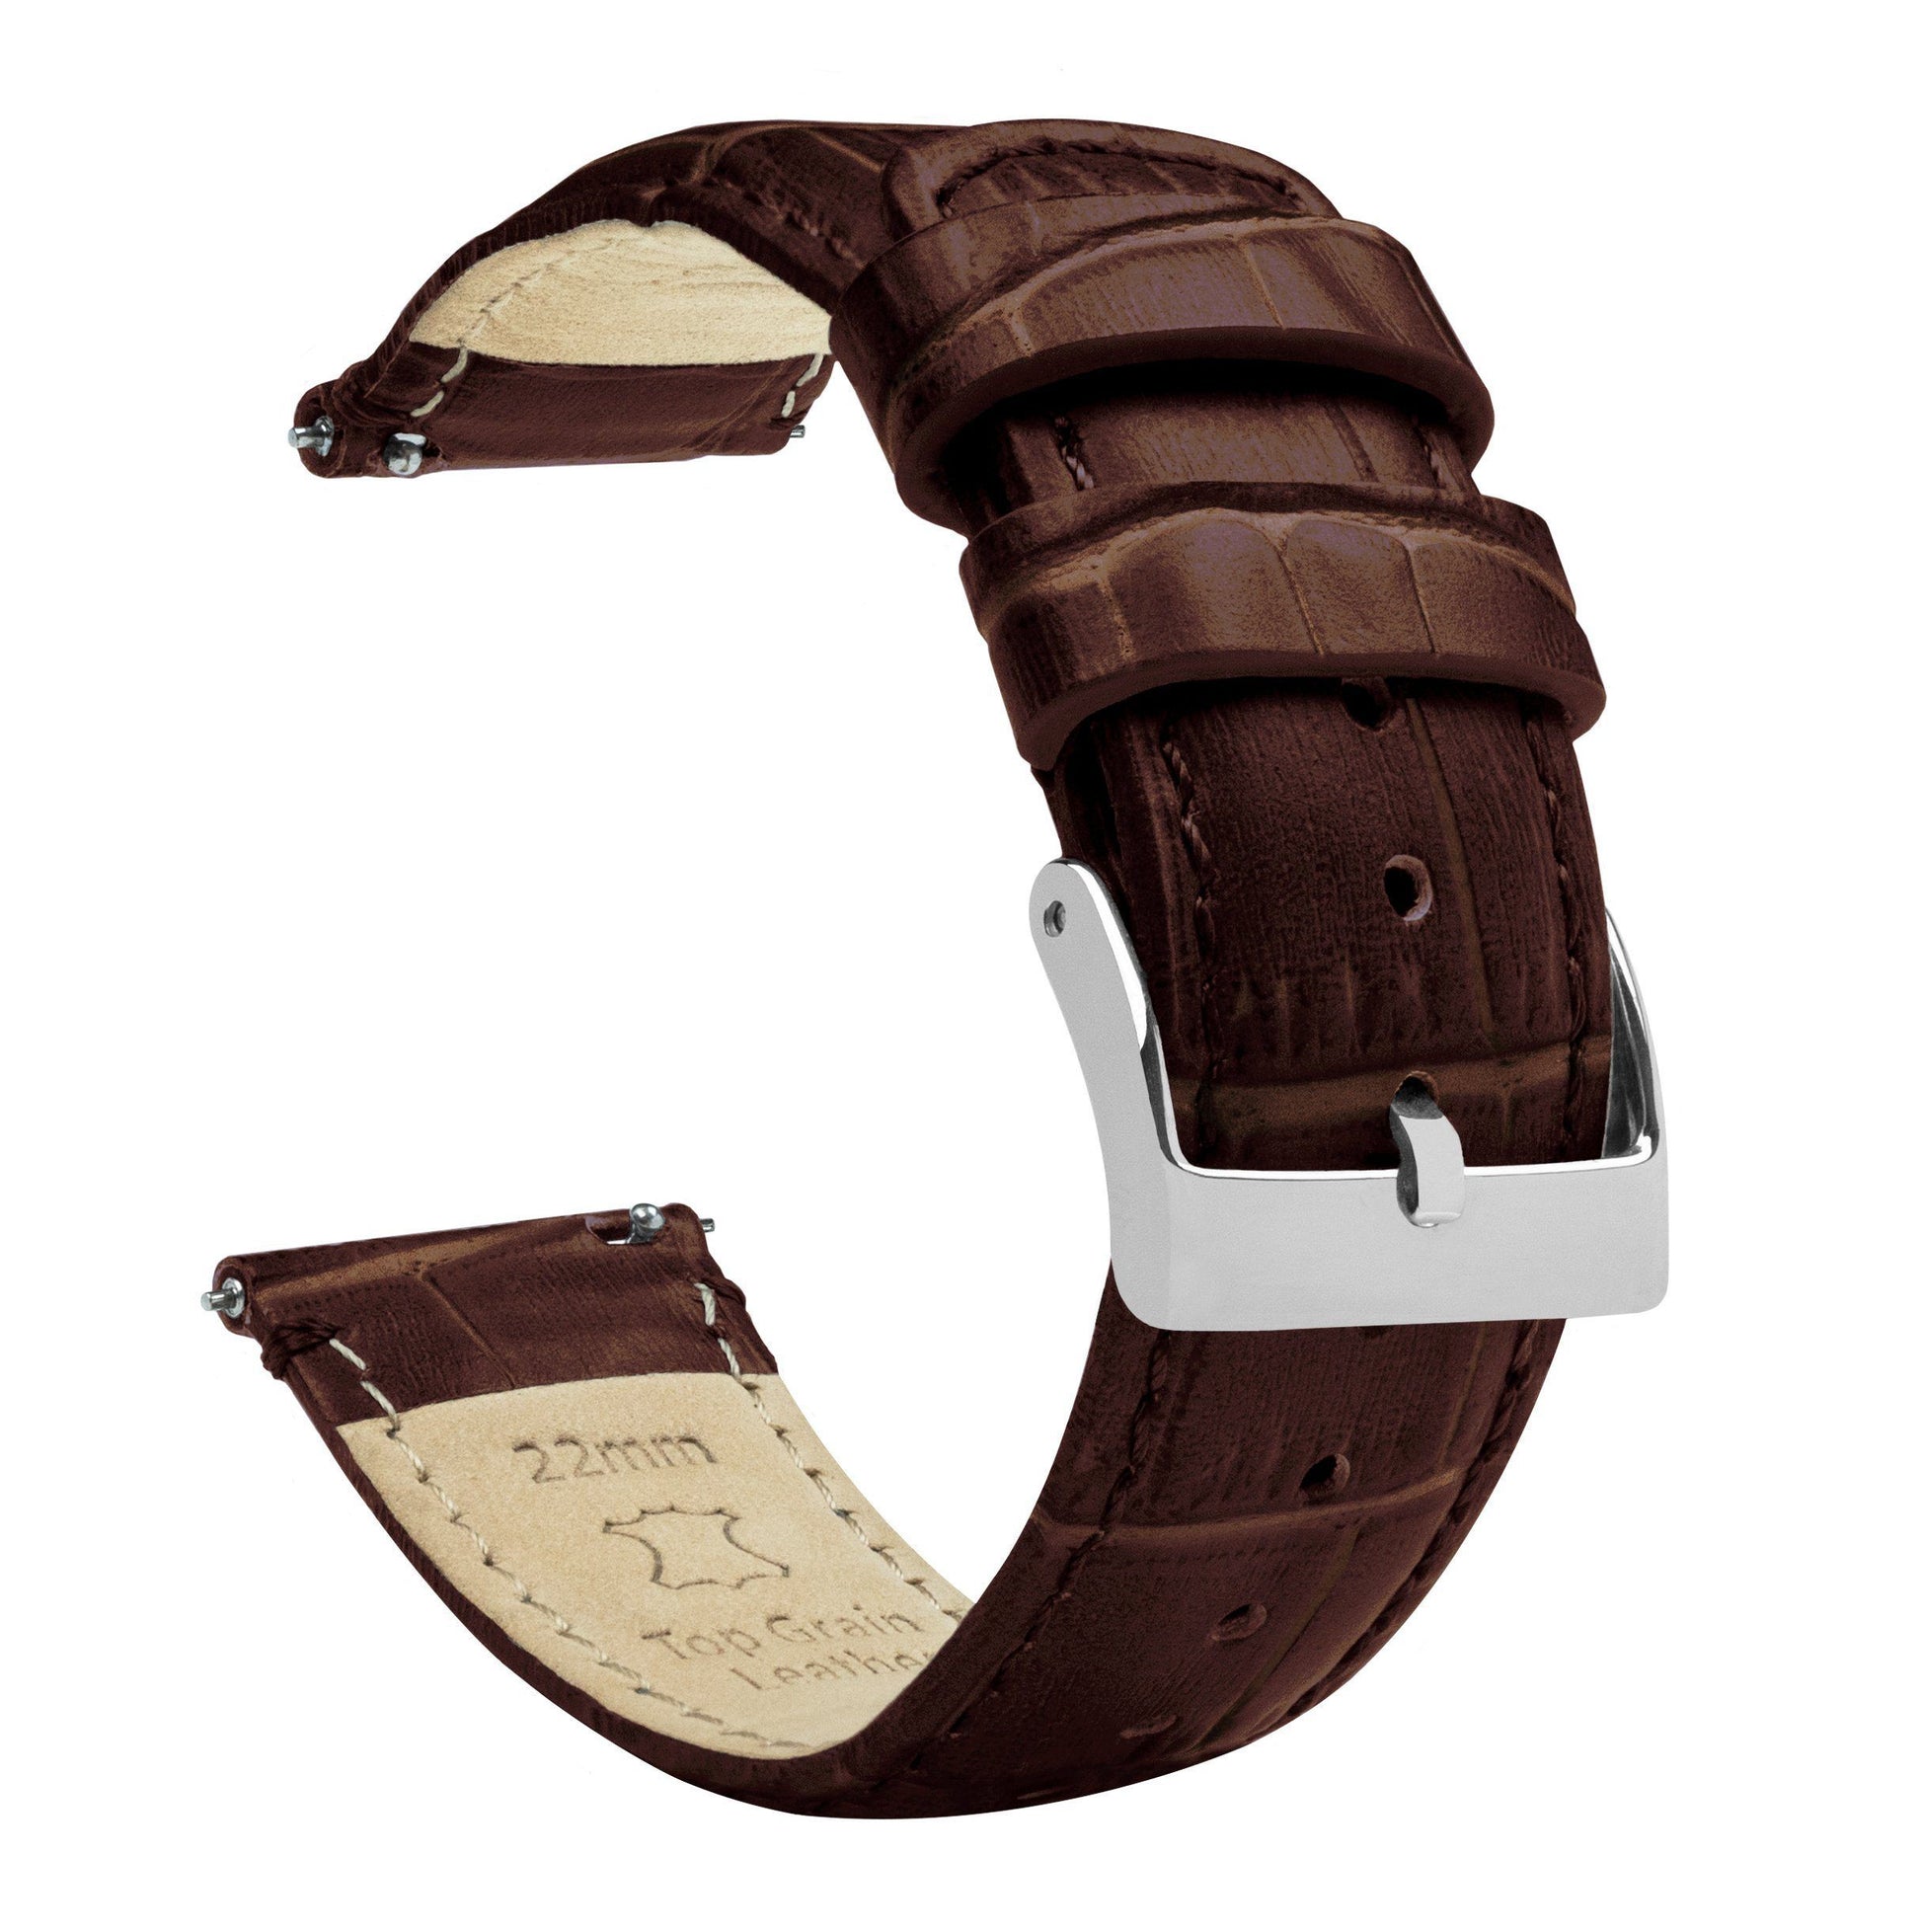 All you need to know about Crocodile watch strap and Alligator watch strap